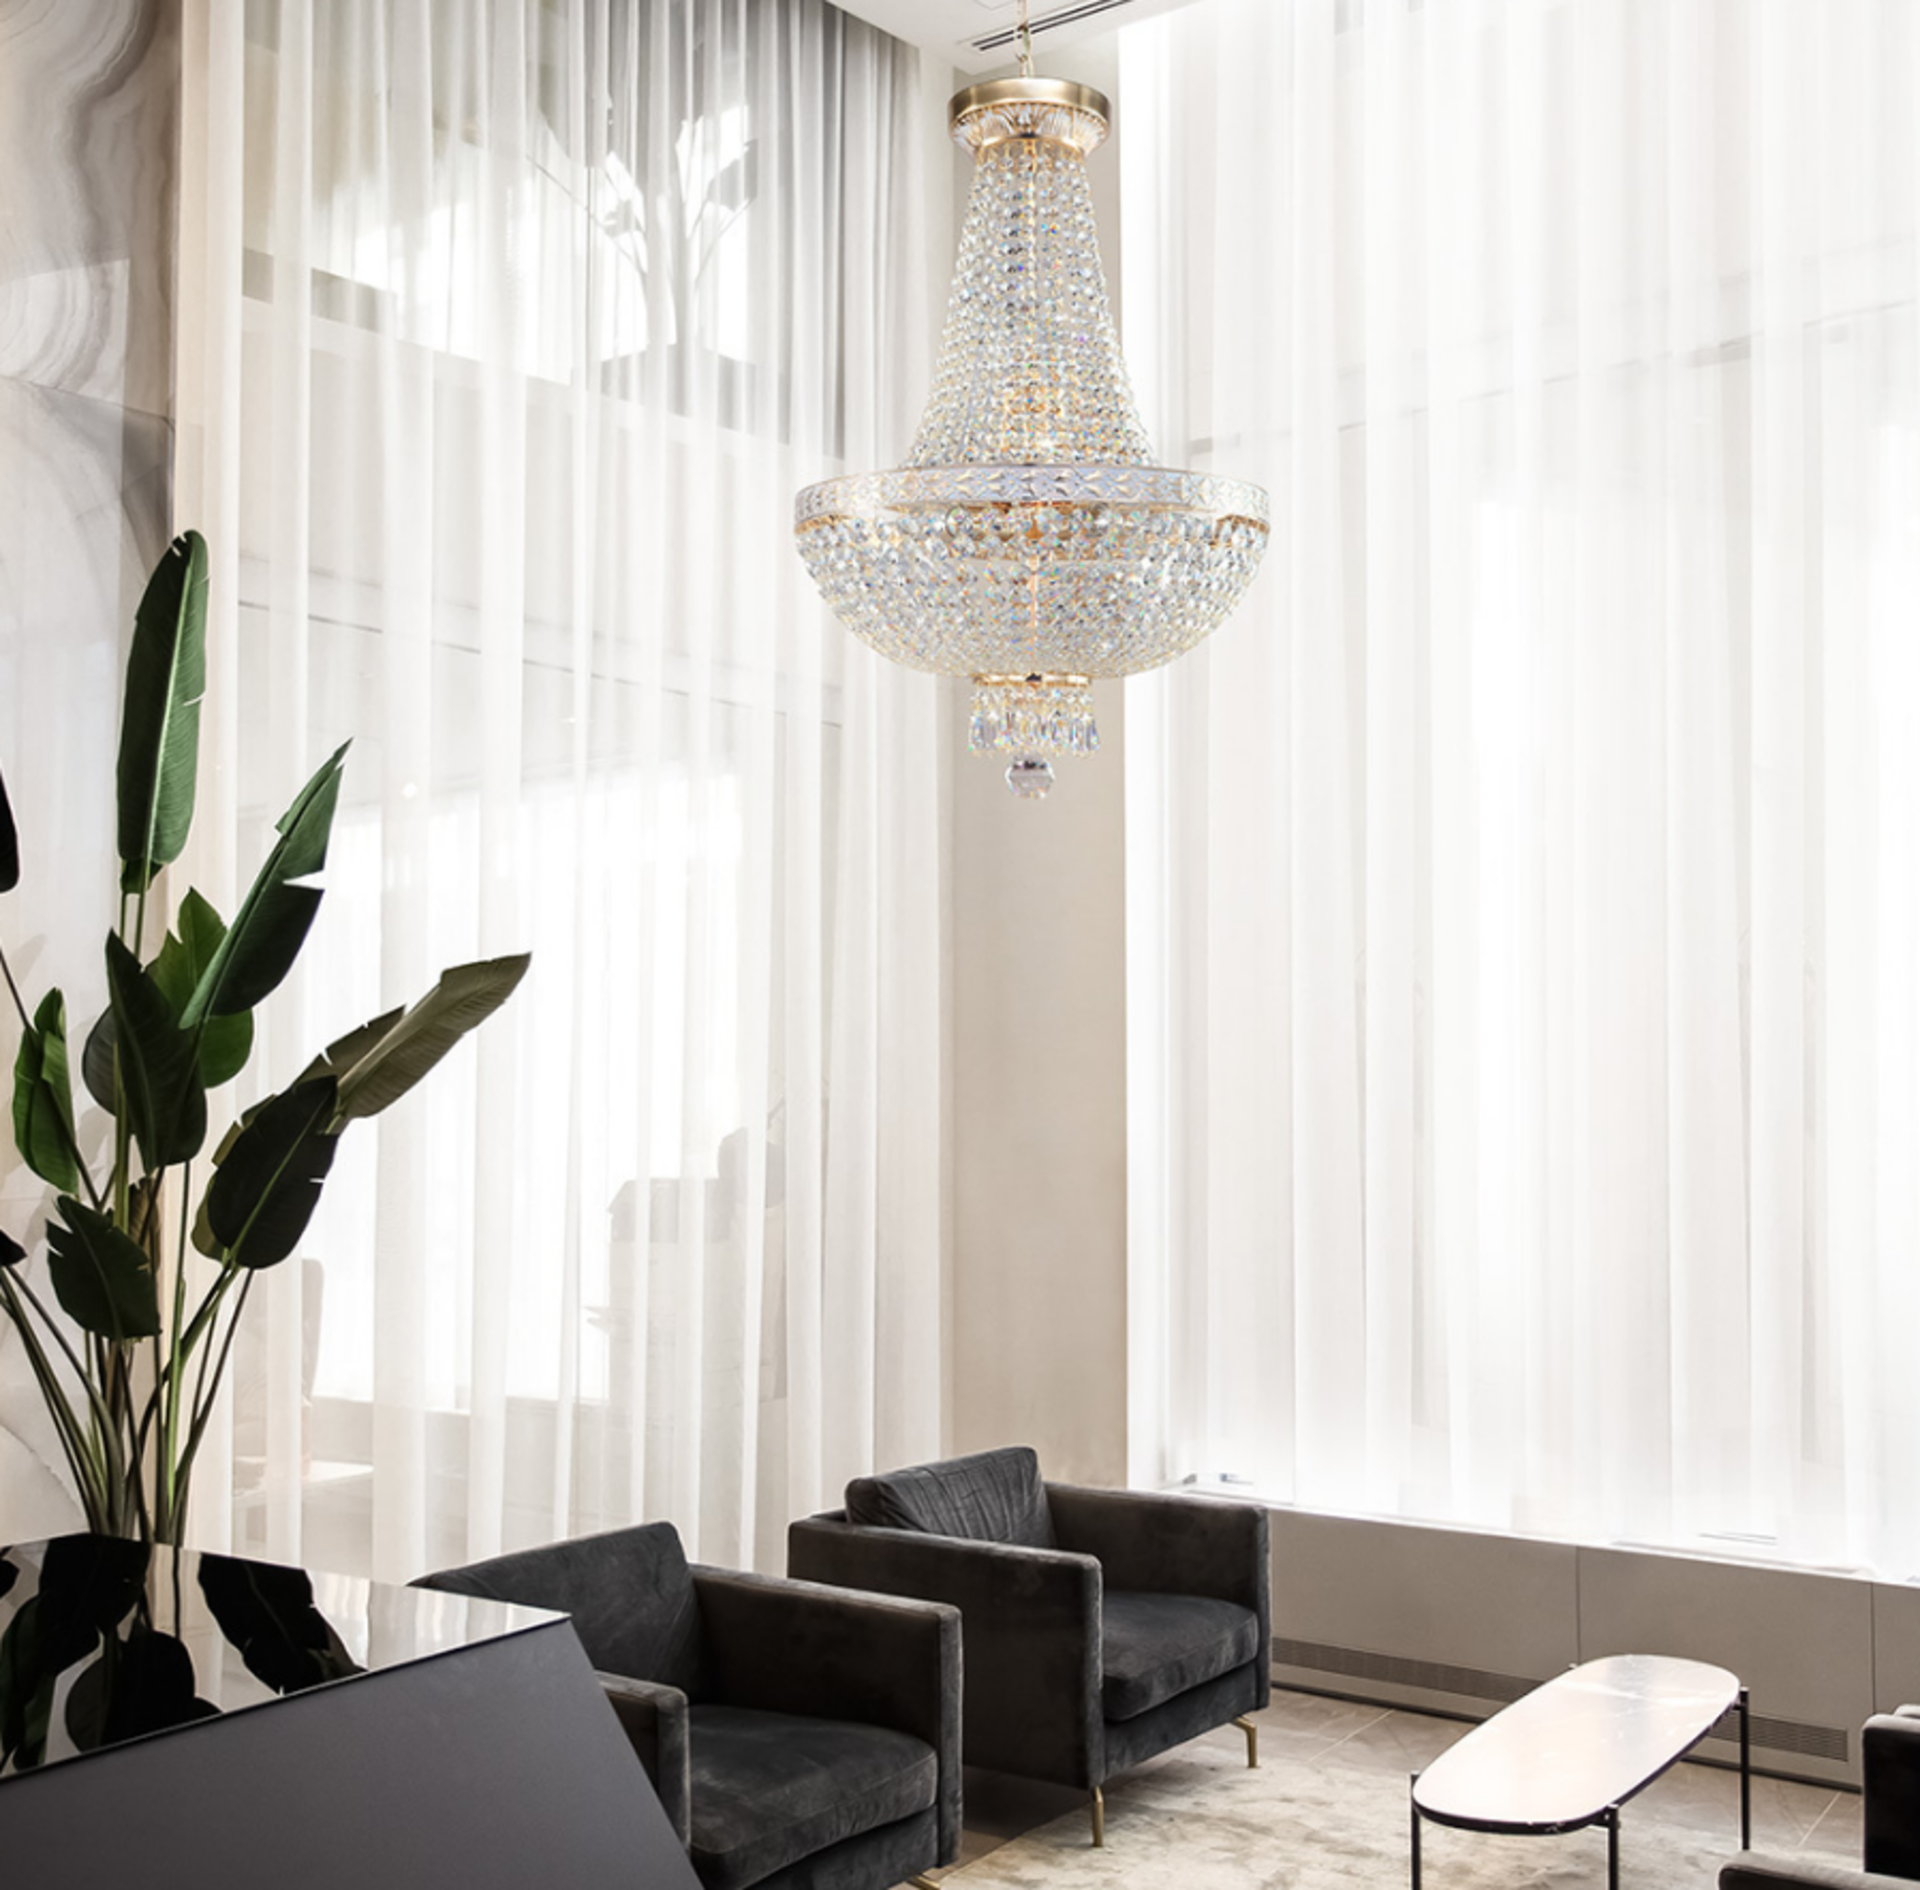 Empire Style Crystal Chandelier With A Height Maximum Of 170cm Featuring A Gold Plated Frame,